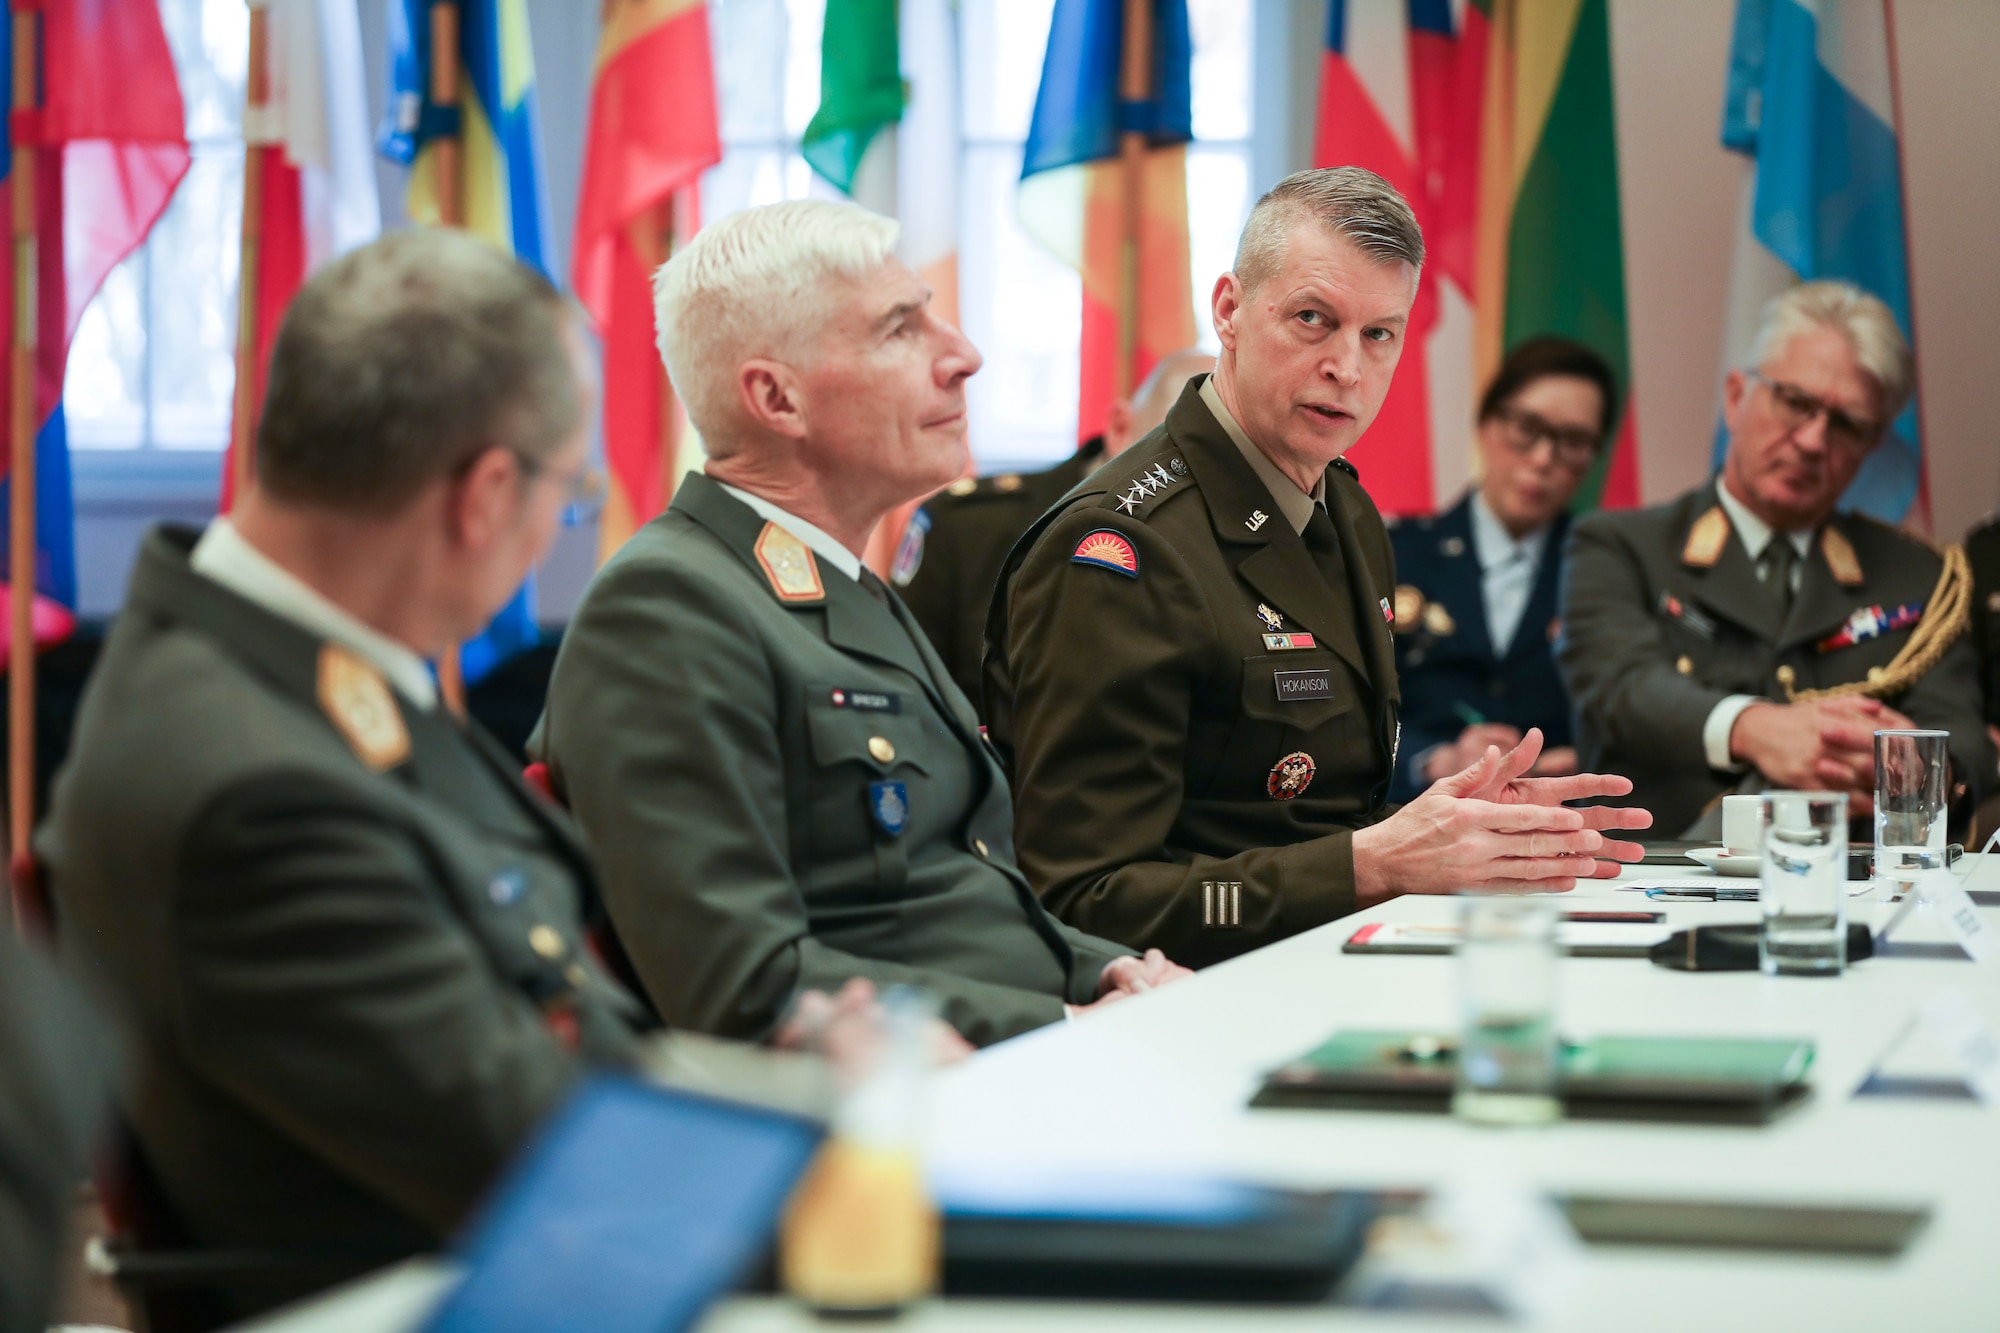 Army Gen. Daniel Hokanson, chief, National Guard Bureau, speaks with Gen. Rudolf Striedinger, Austria’s chief of defense, and joint Austrian Armed Forces leaders at the Federal Ministry of Defence of Austria in Vienna Jan. 19, 2024. Austria and the Vermont National Guard are paired in the 100-nation Defense Department National Guard State Partnership Program.